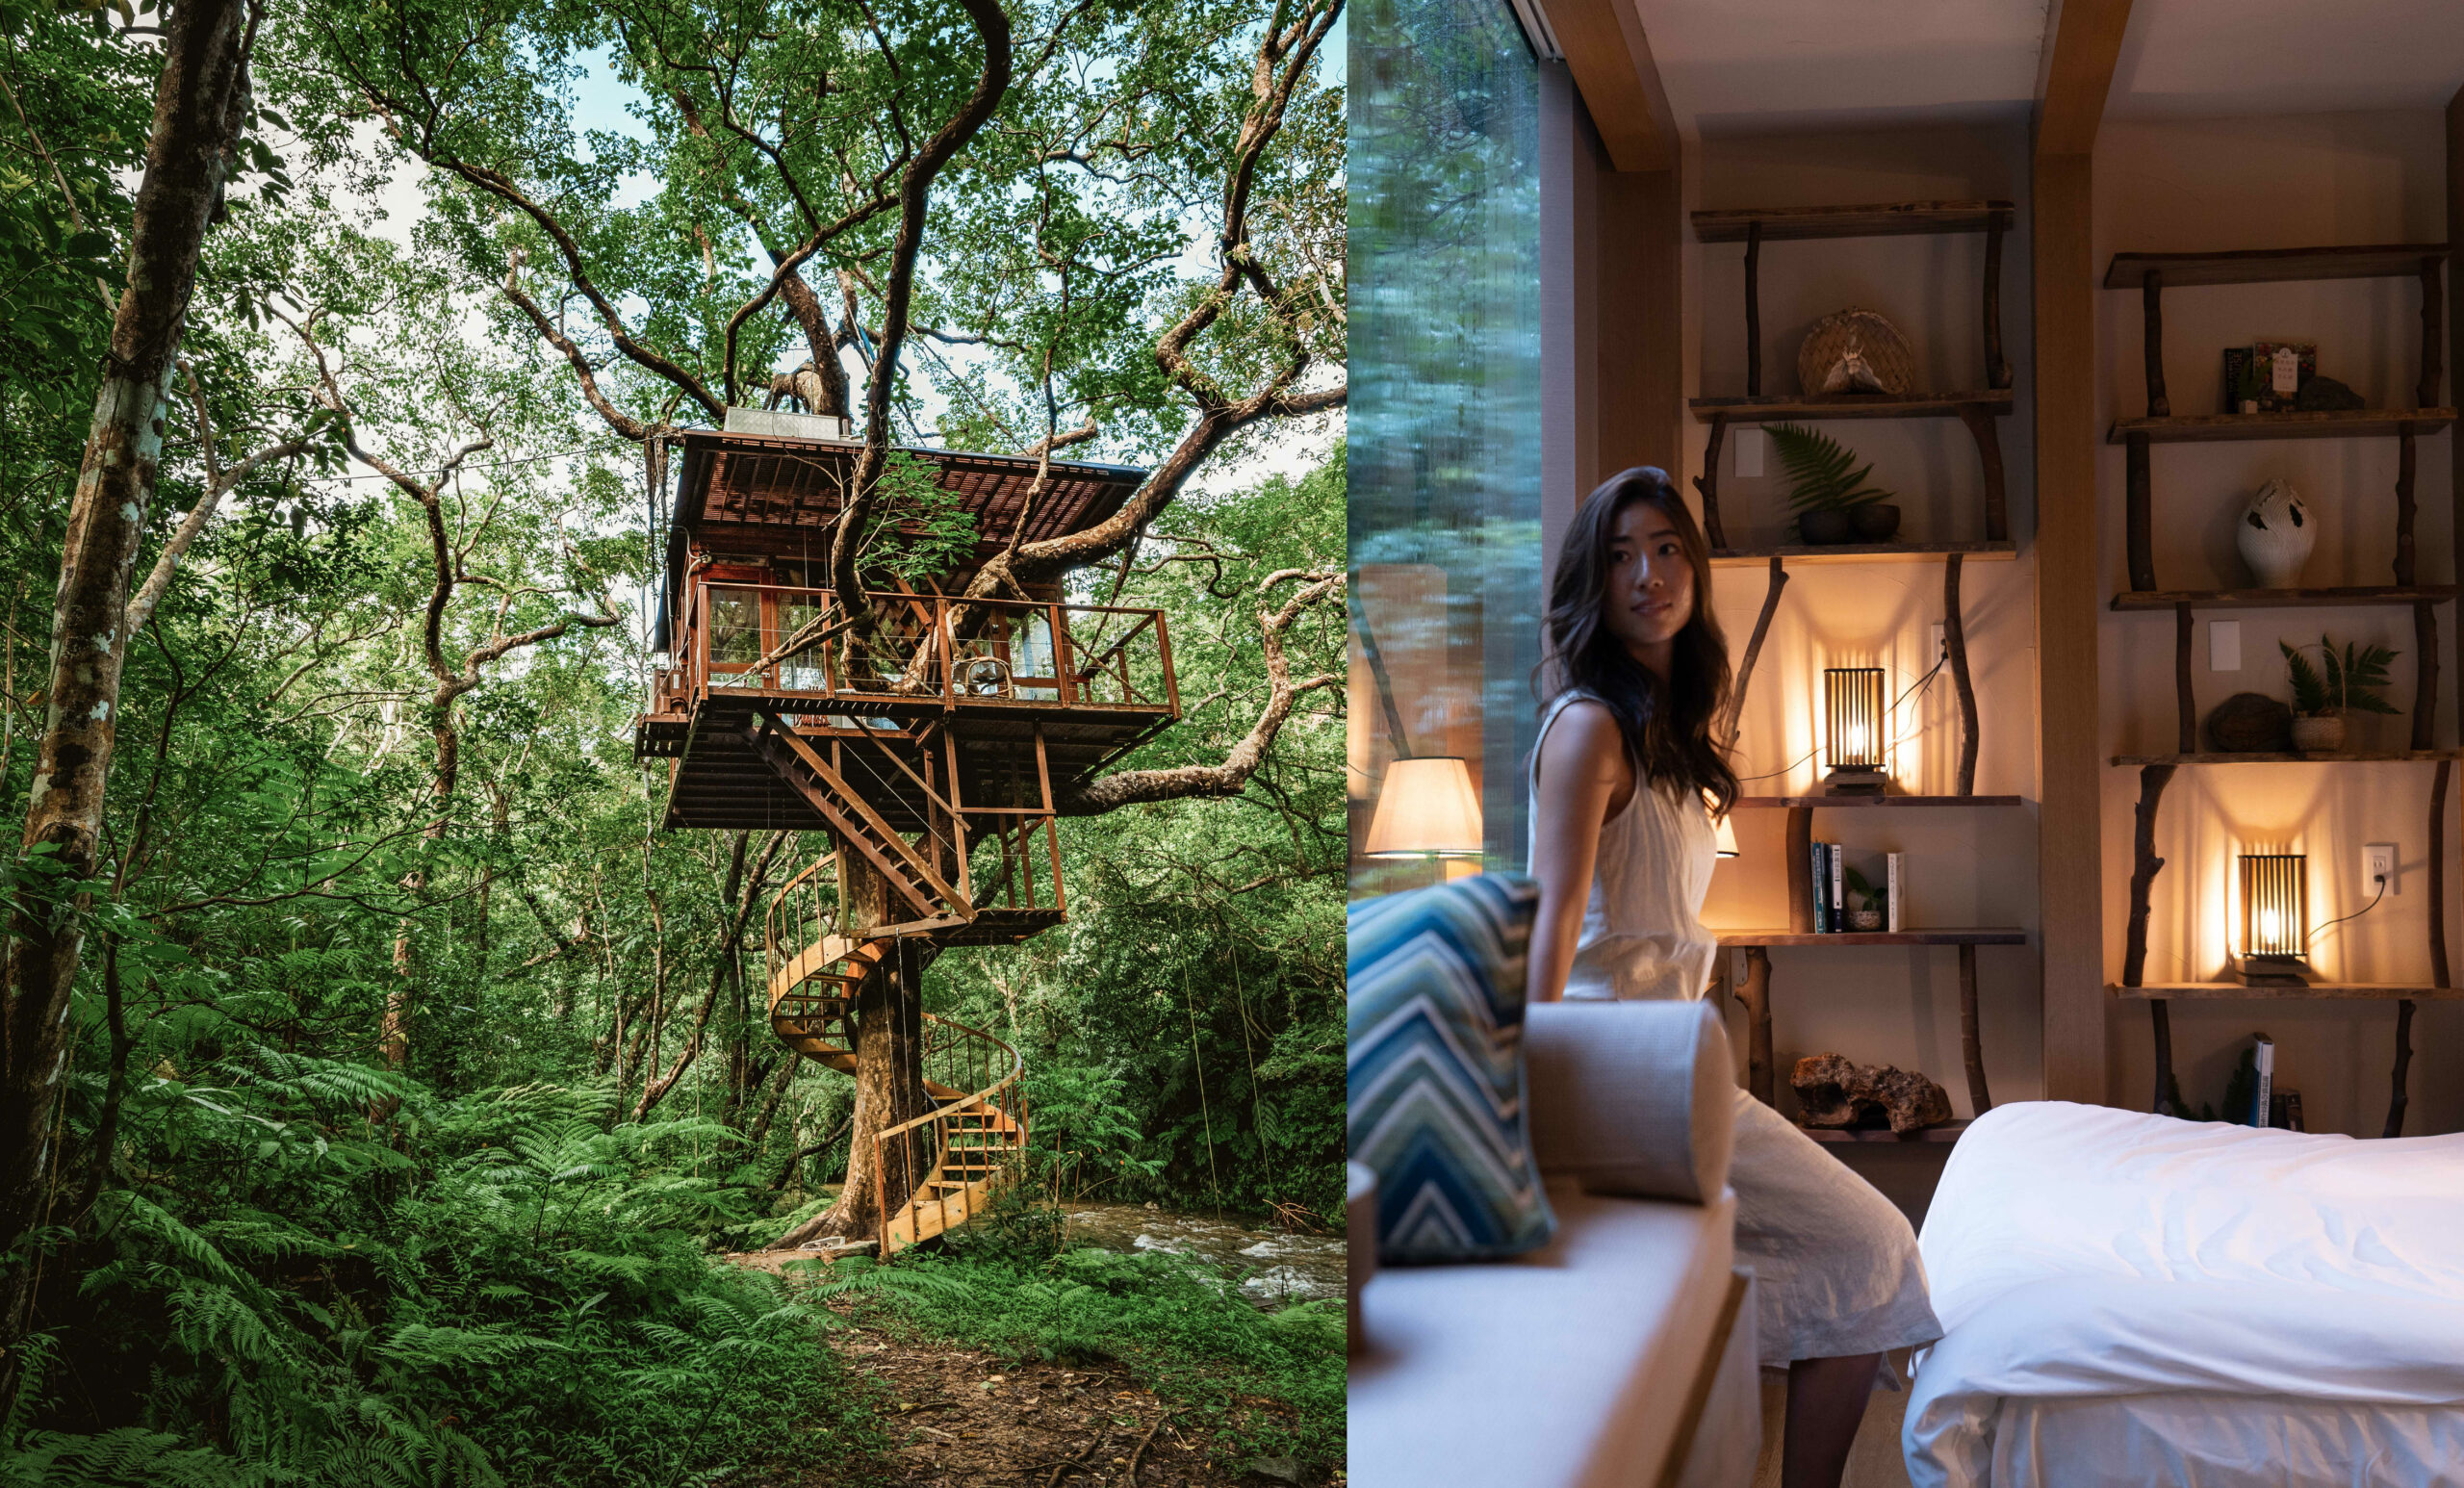 The place to hire treehouses in U.S., Japan, Australia and Costa Rica